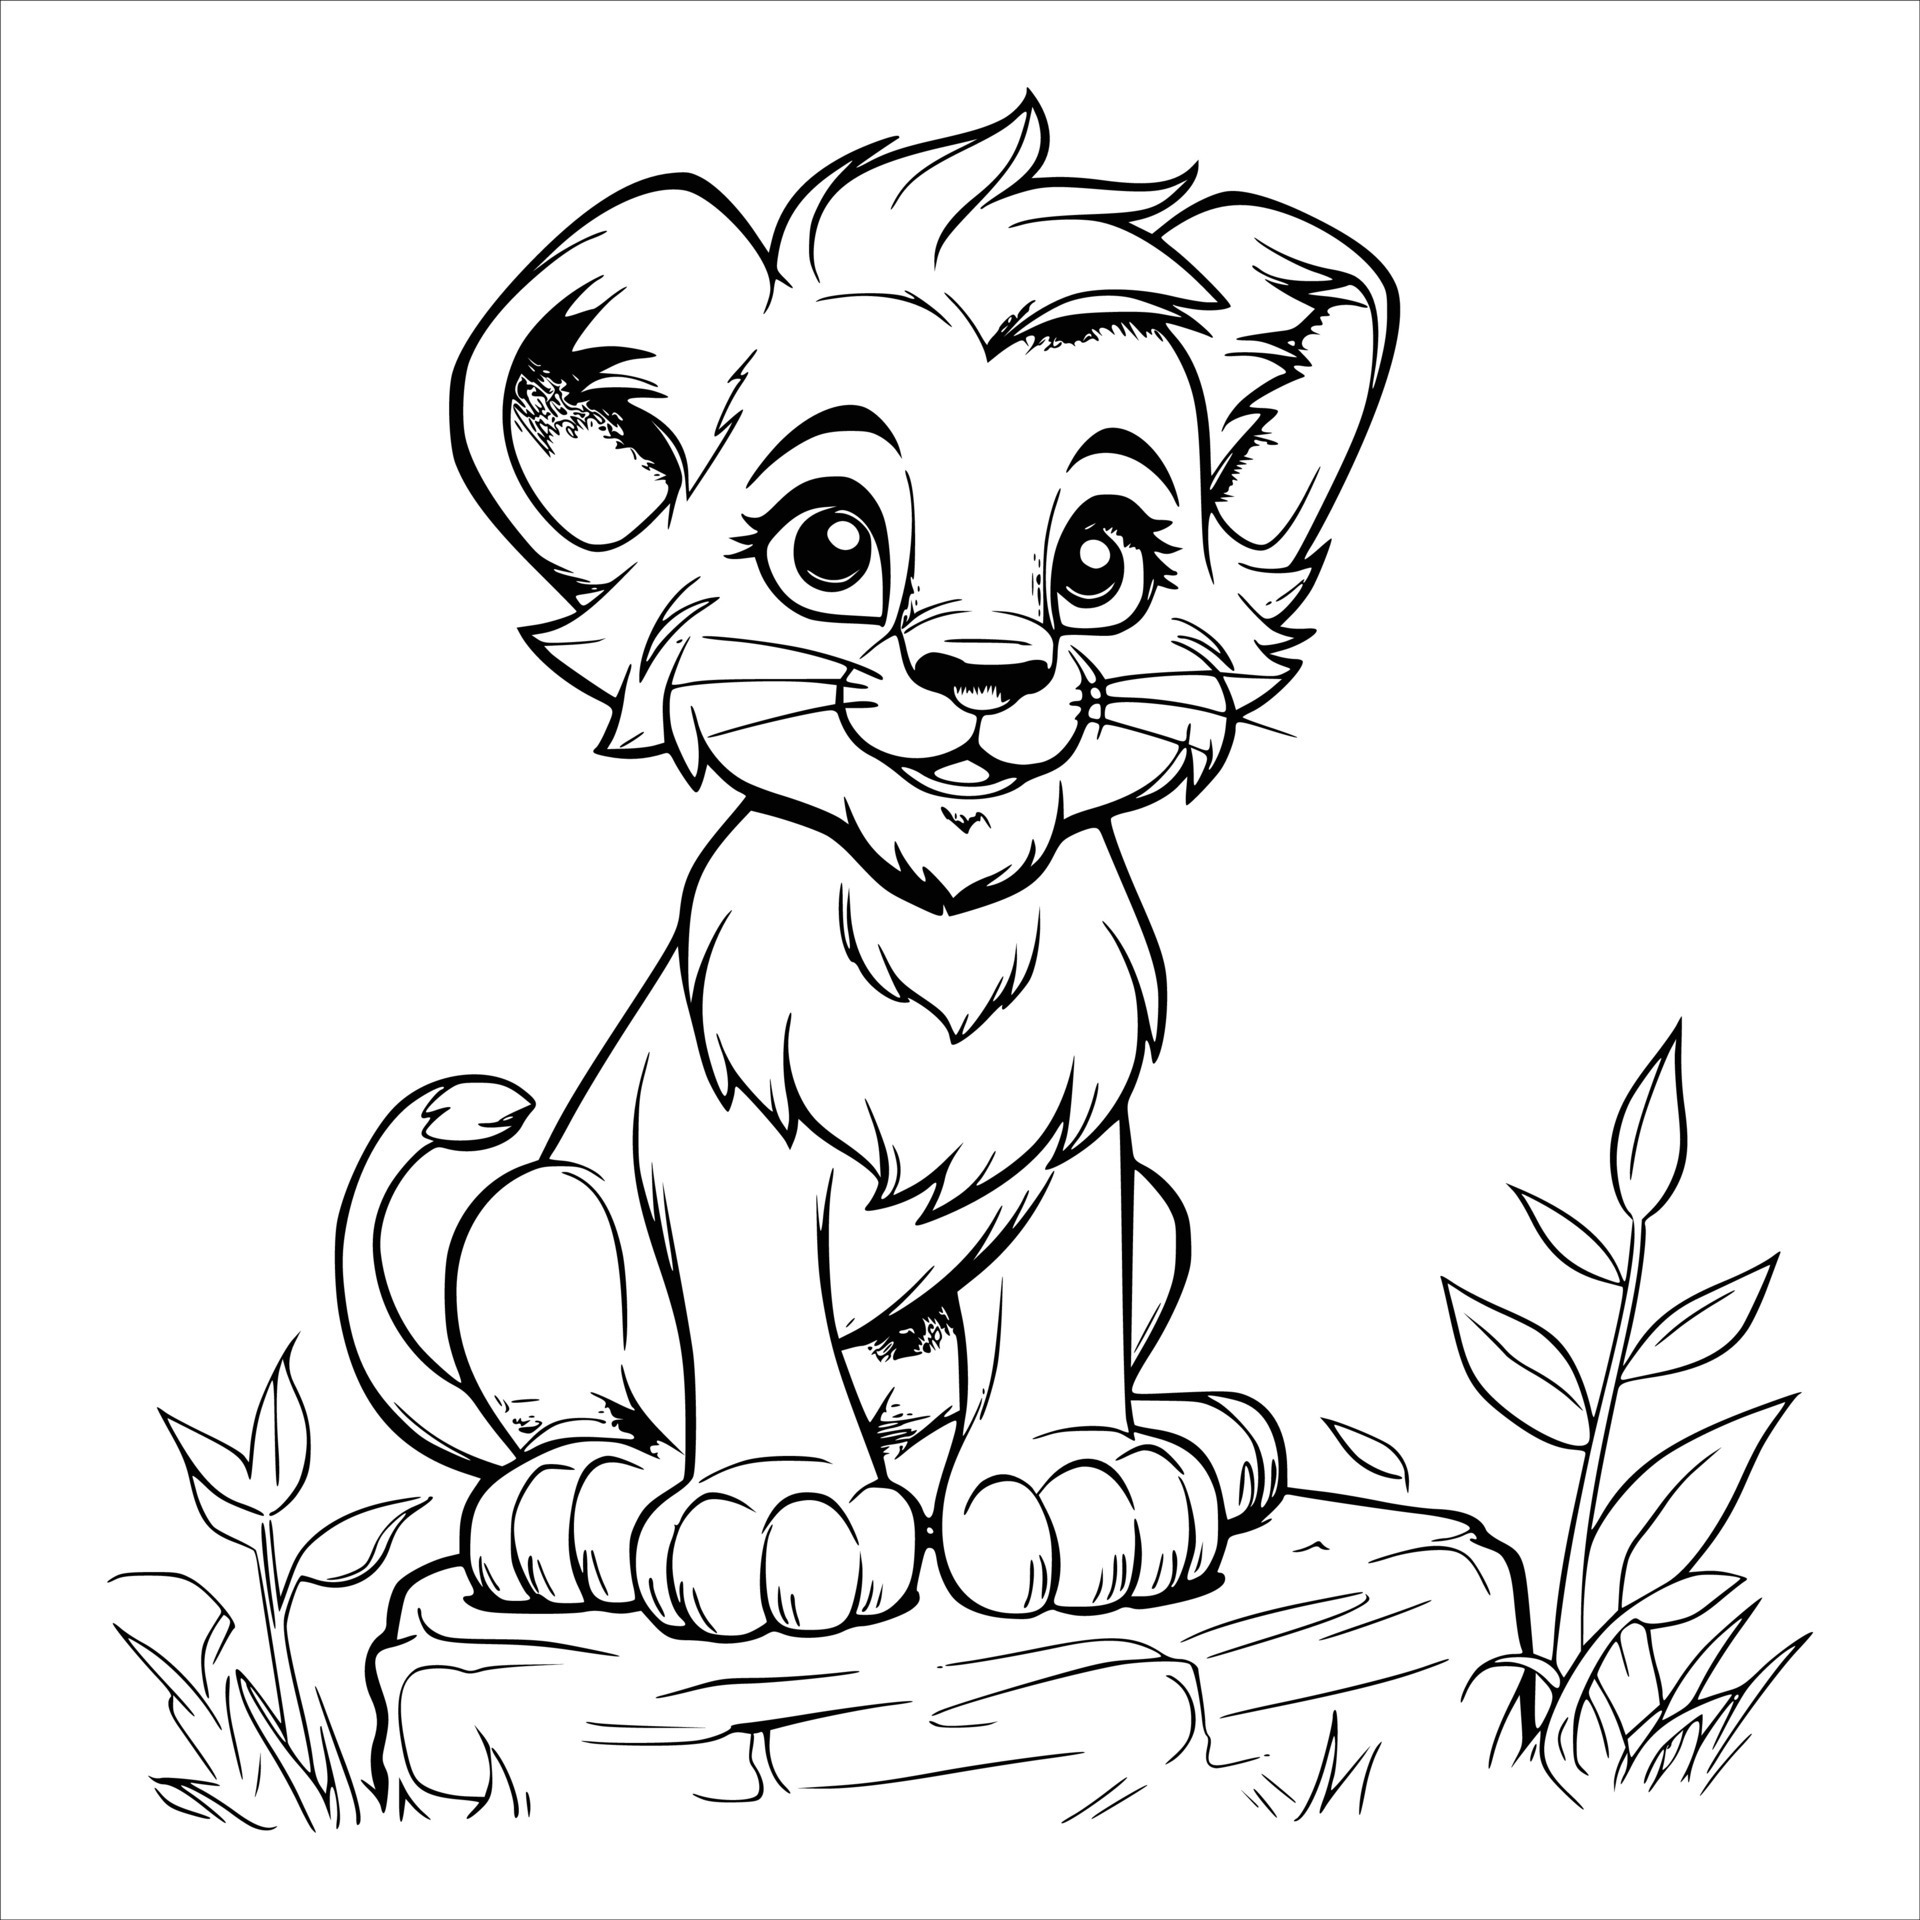 How to Draw a Lion - Easy Drawing Tutorial For Kids-saigonsouth.com.vn